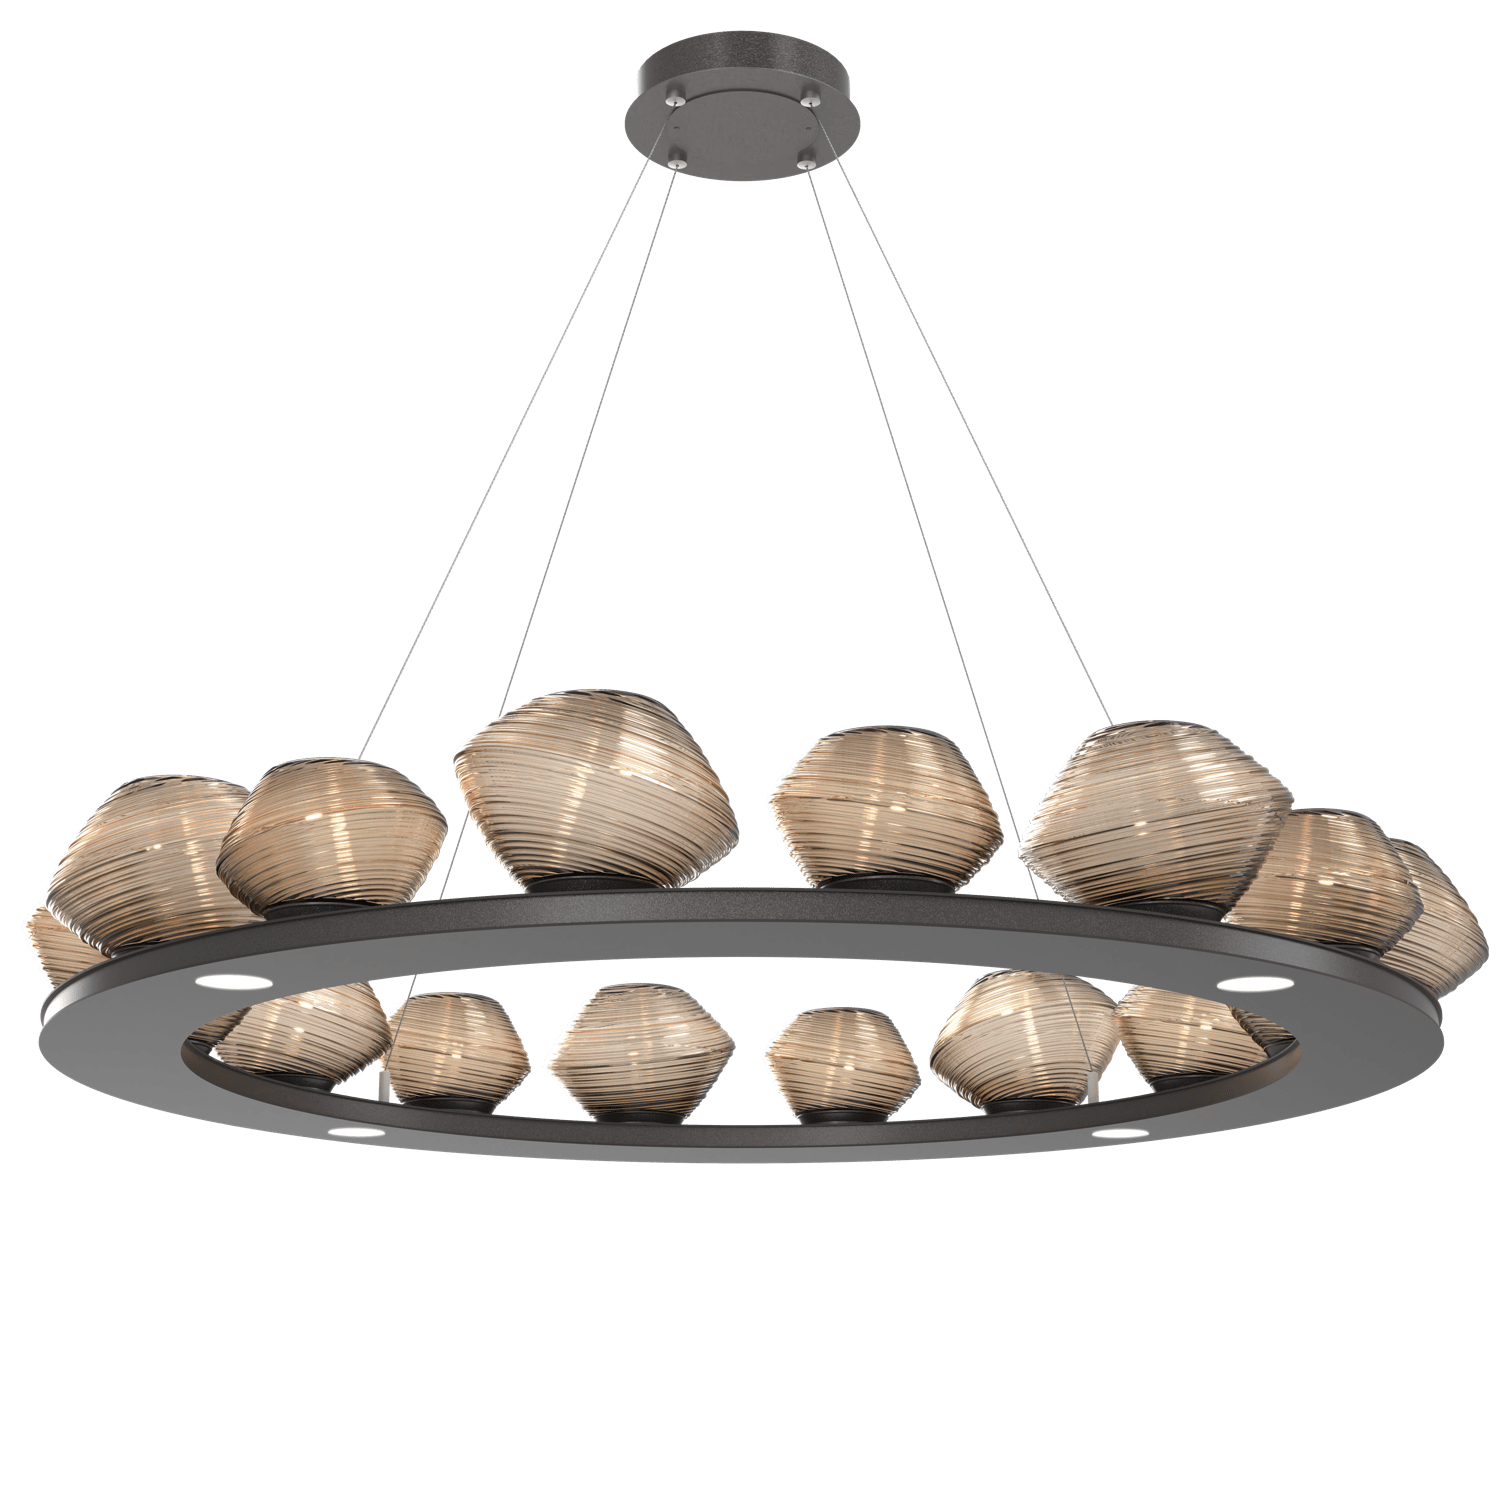 CHB0089-0D-GP-B-Hammerton-Studio-Mesa-48-inch-ring-chandelier-with-graphite-finish-and-bronze-blown-glass-shades-and-LED-lamping